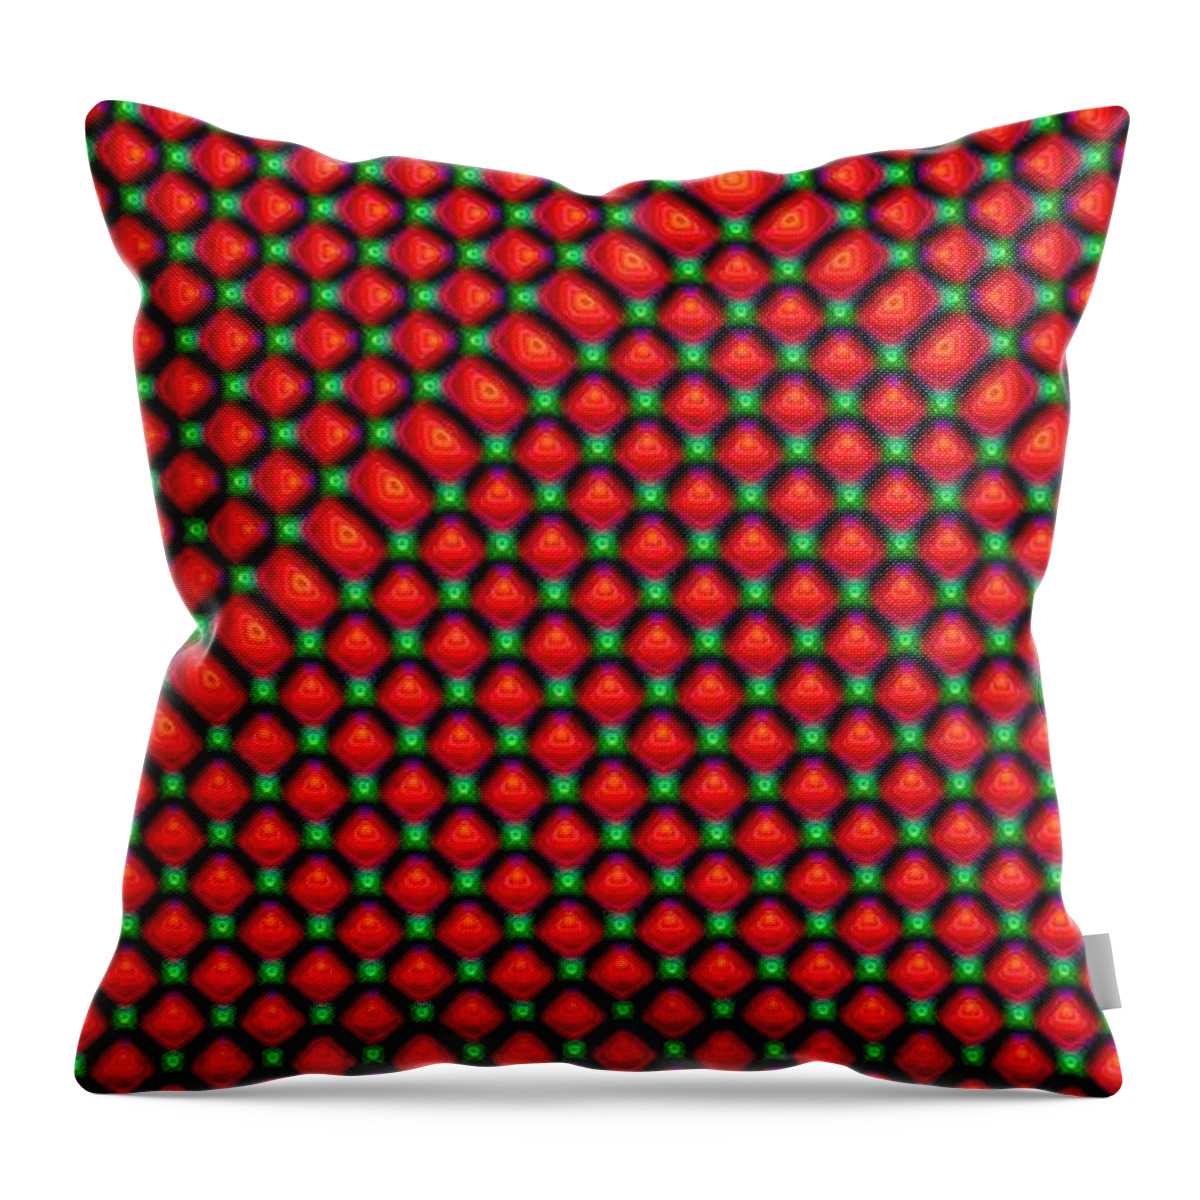 Abstract Throw Pillow featuring the digital art Corner by Ronald Bissett